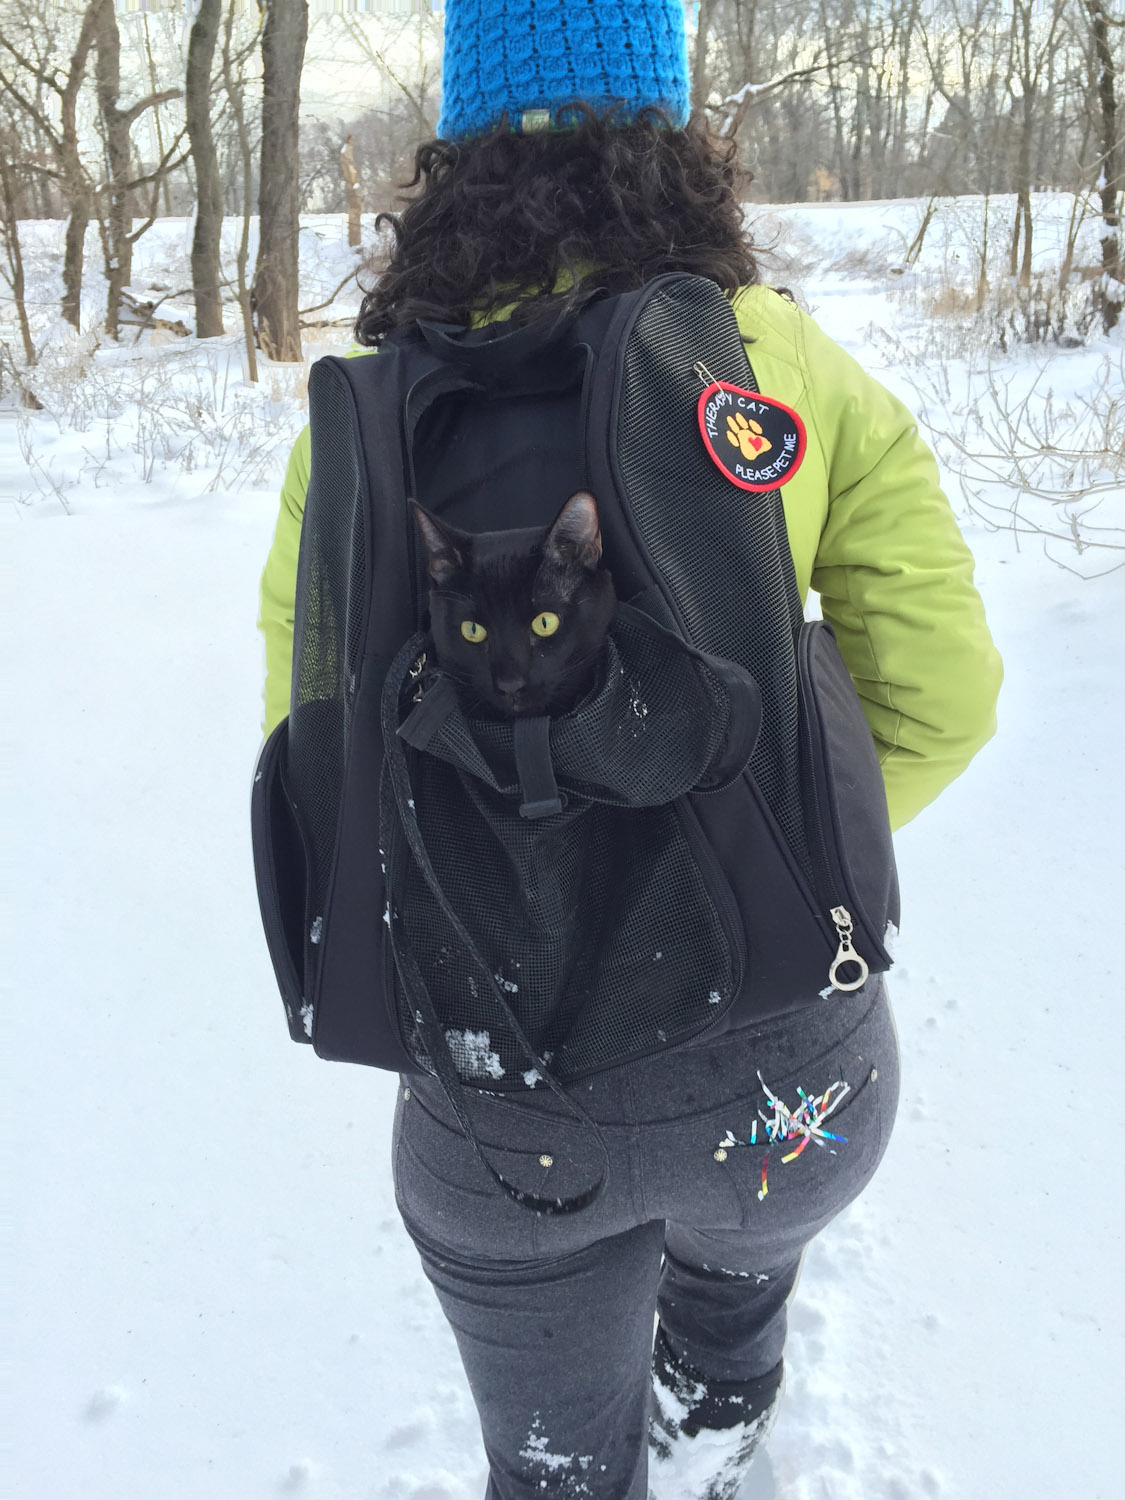 cat holding backpack